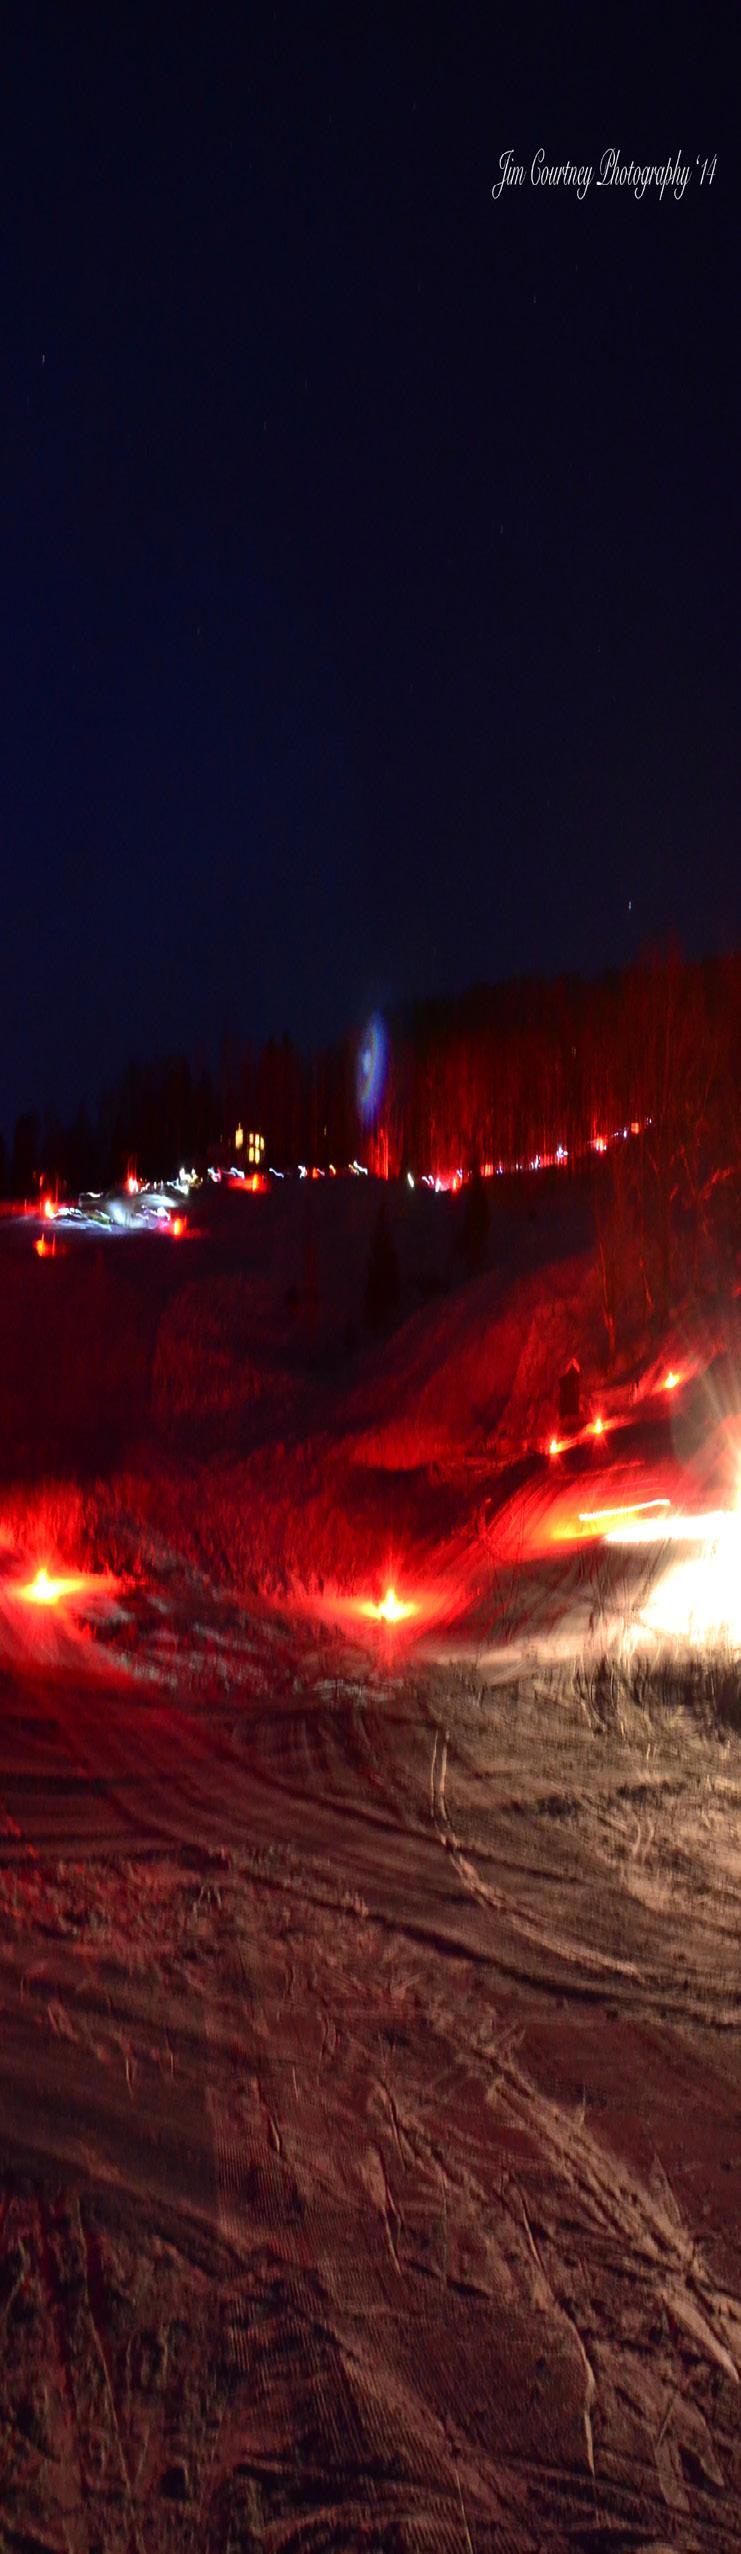 Quechee at 5:00pm sharp! Ski down with flashlights and glow sticks! A grand fireworks display will follow the parade.